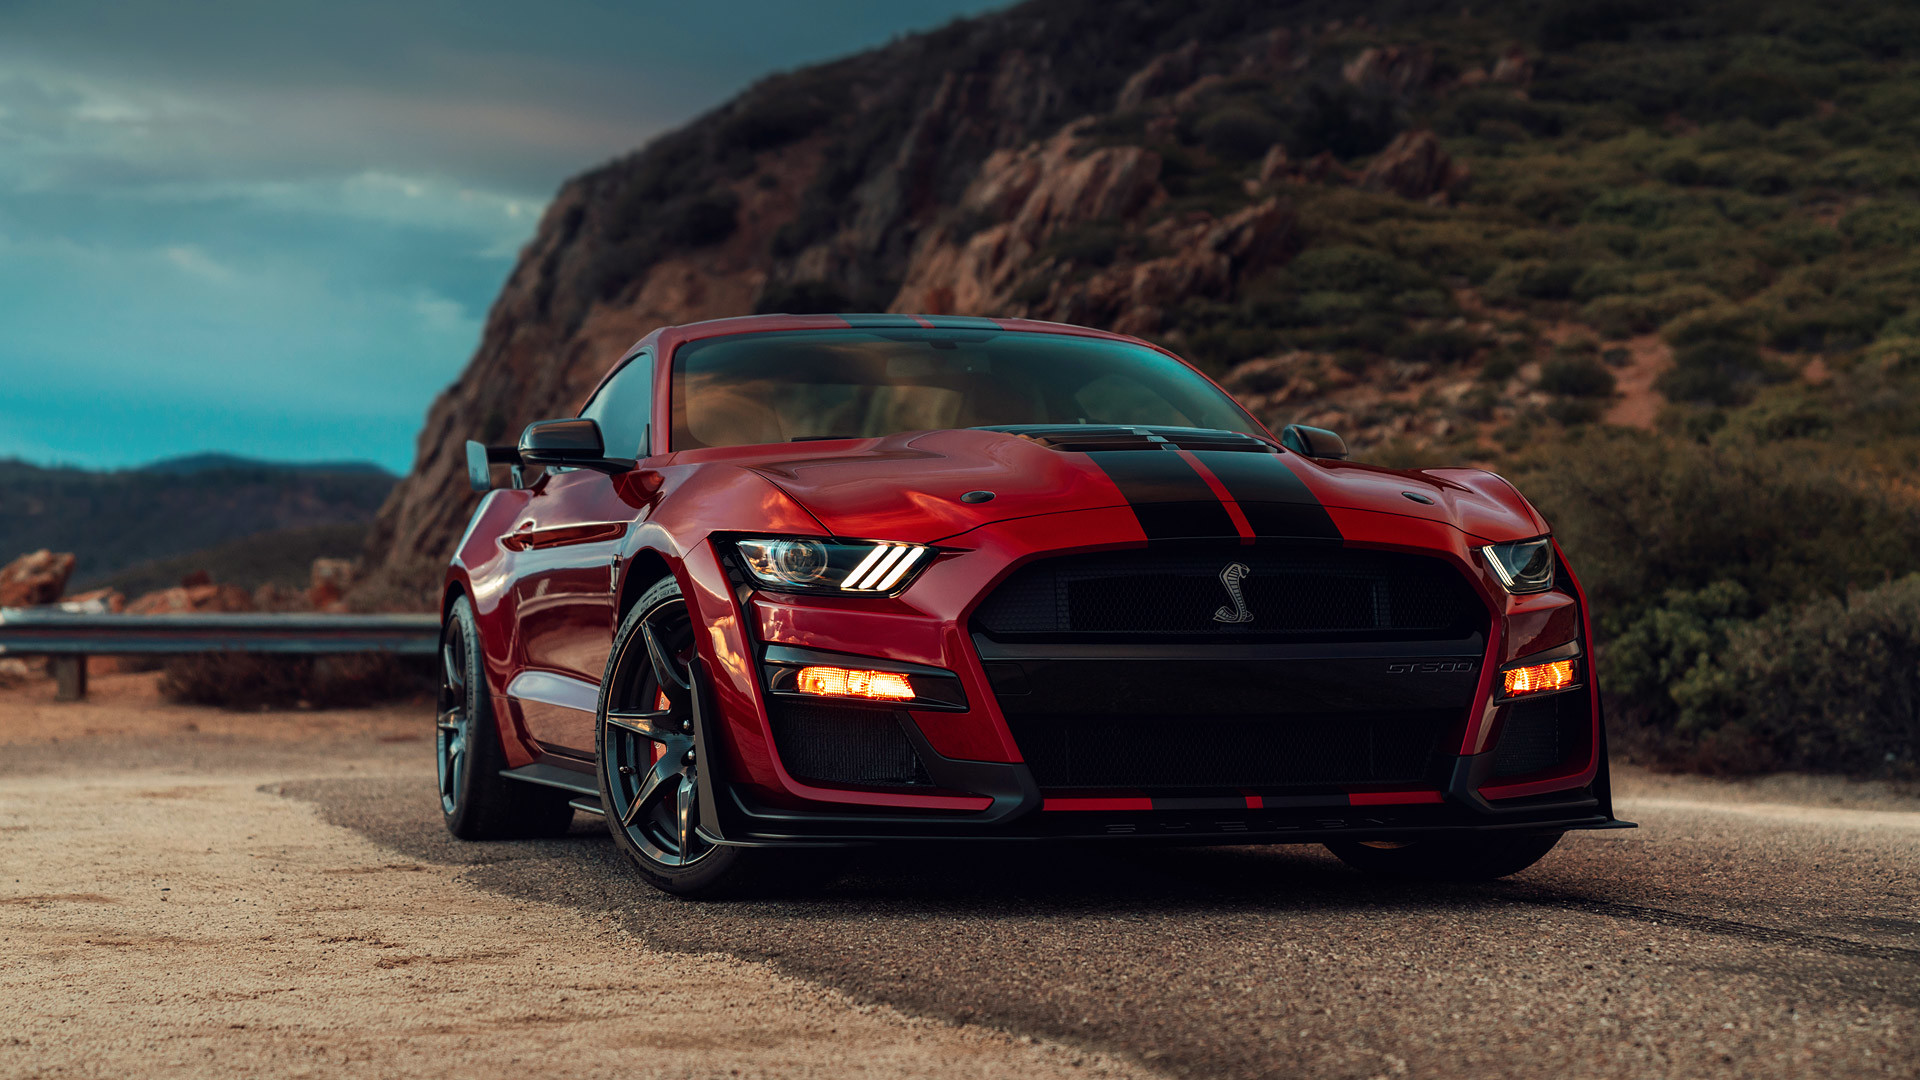 1920x1080, 2020 Ford Mustang Shelby Gt500 Picture - Ford Mustang Shelby Gt500 - HD Wallpaper 